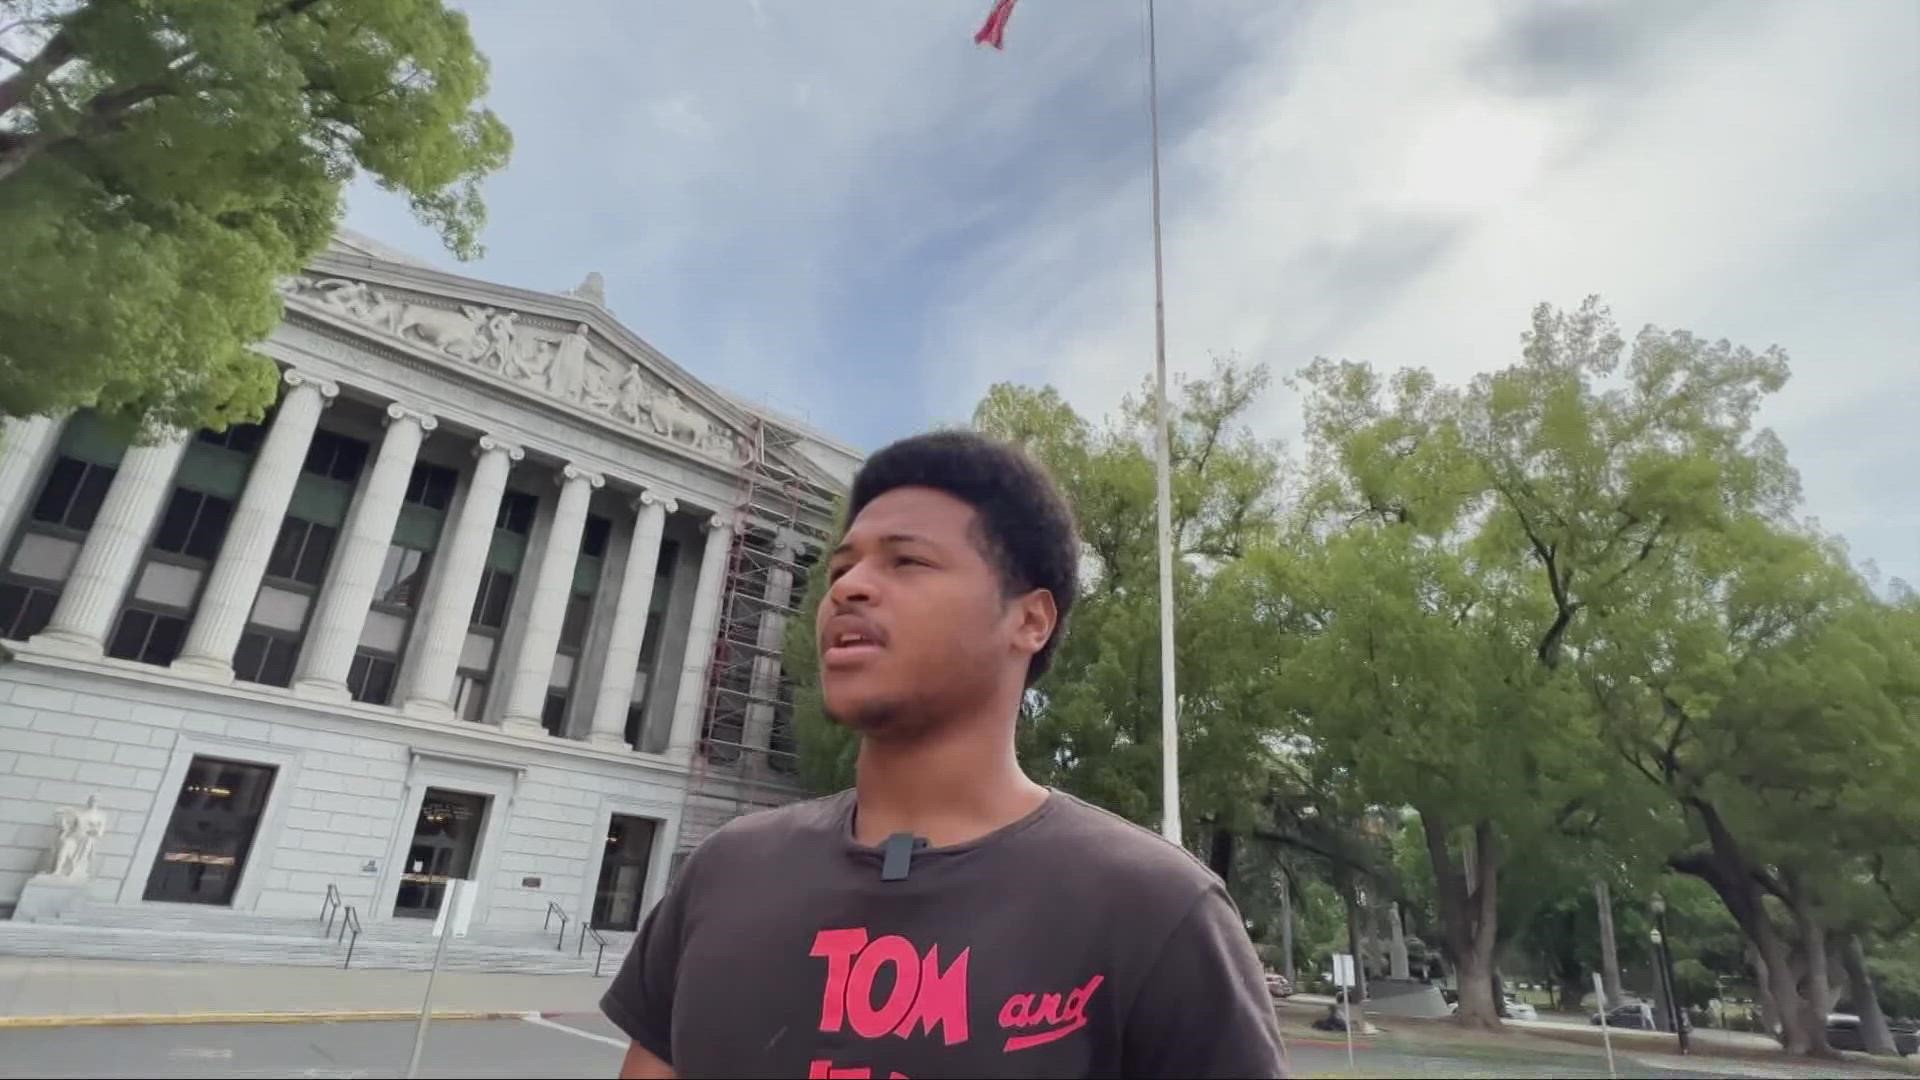 A Sacramento teenager with autism who grew up being bullied at school is finding his voice, and now he’s booked solid singing the National Anthem.